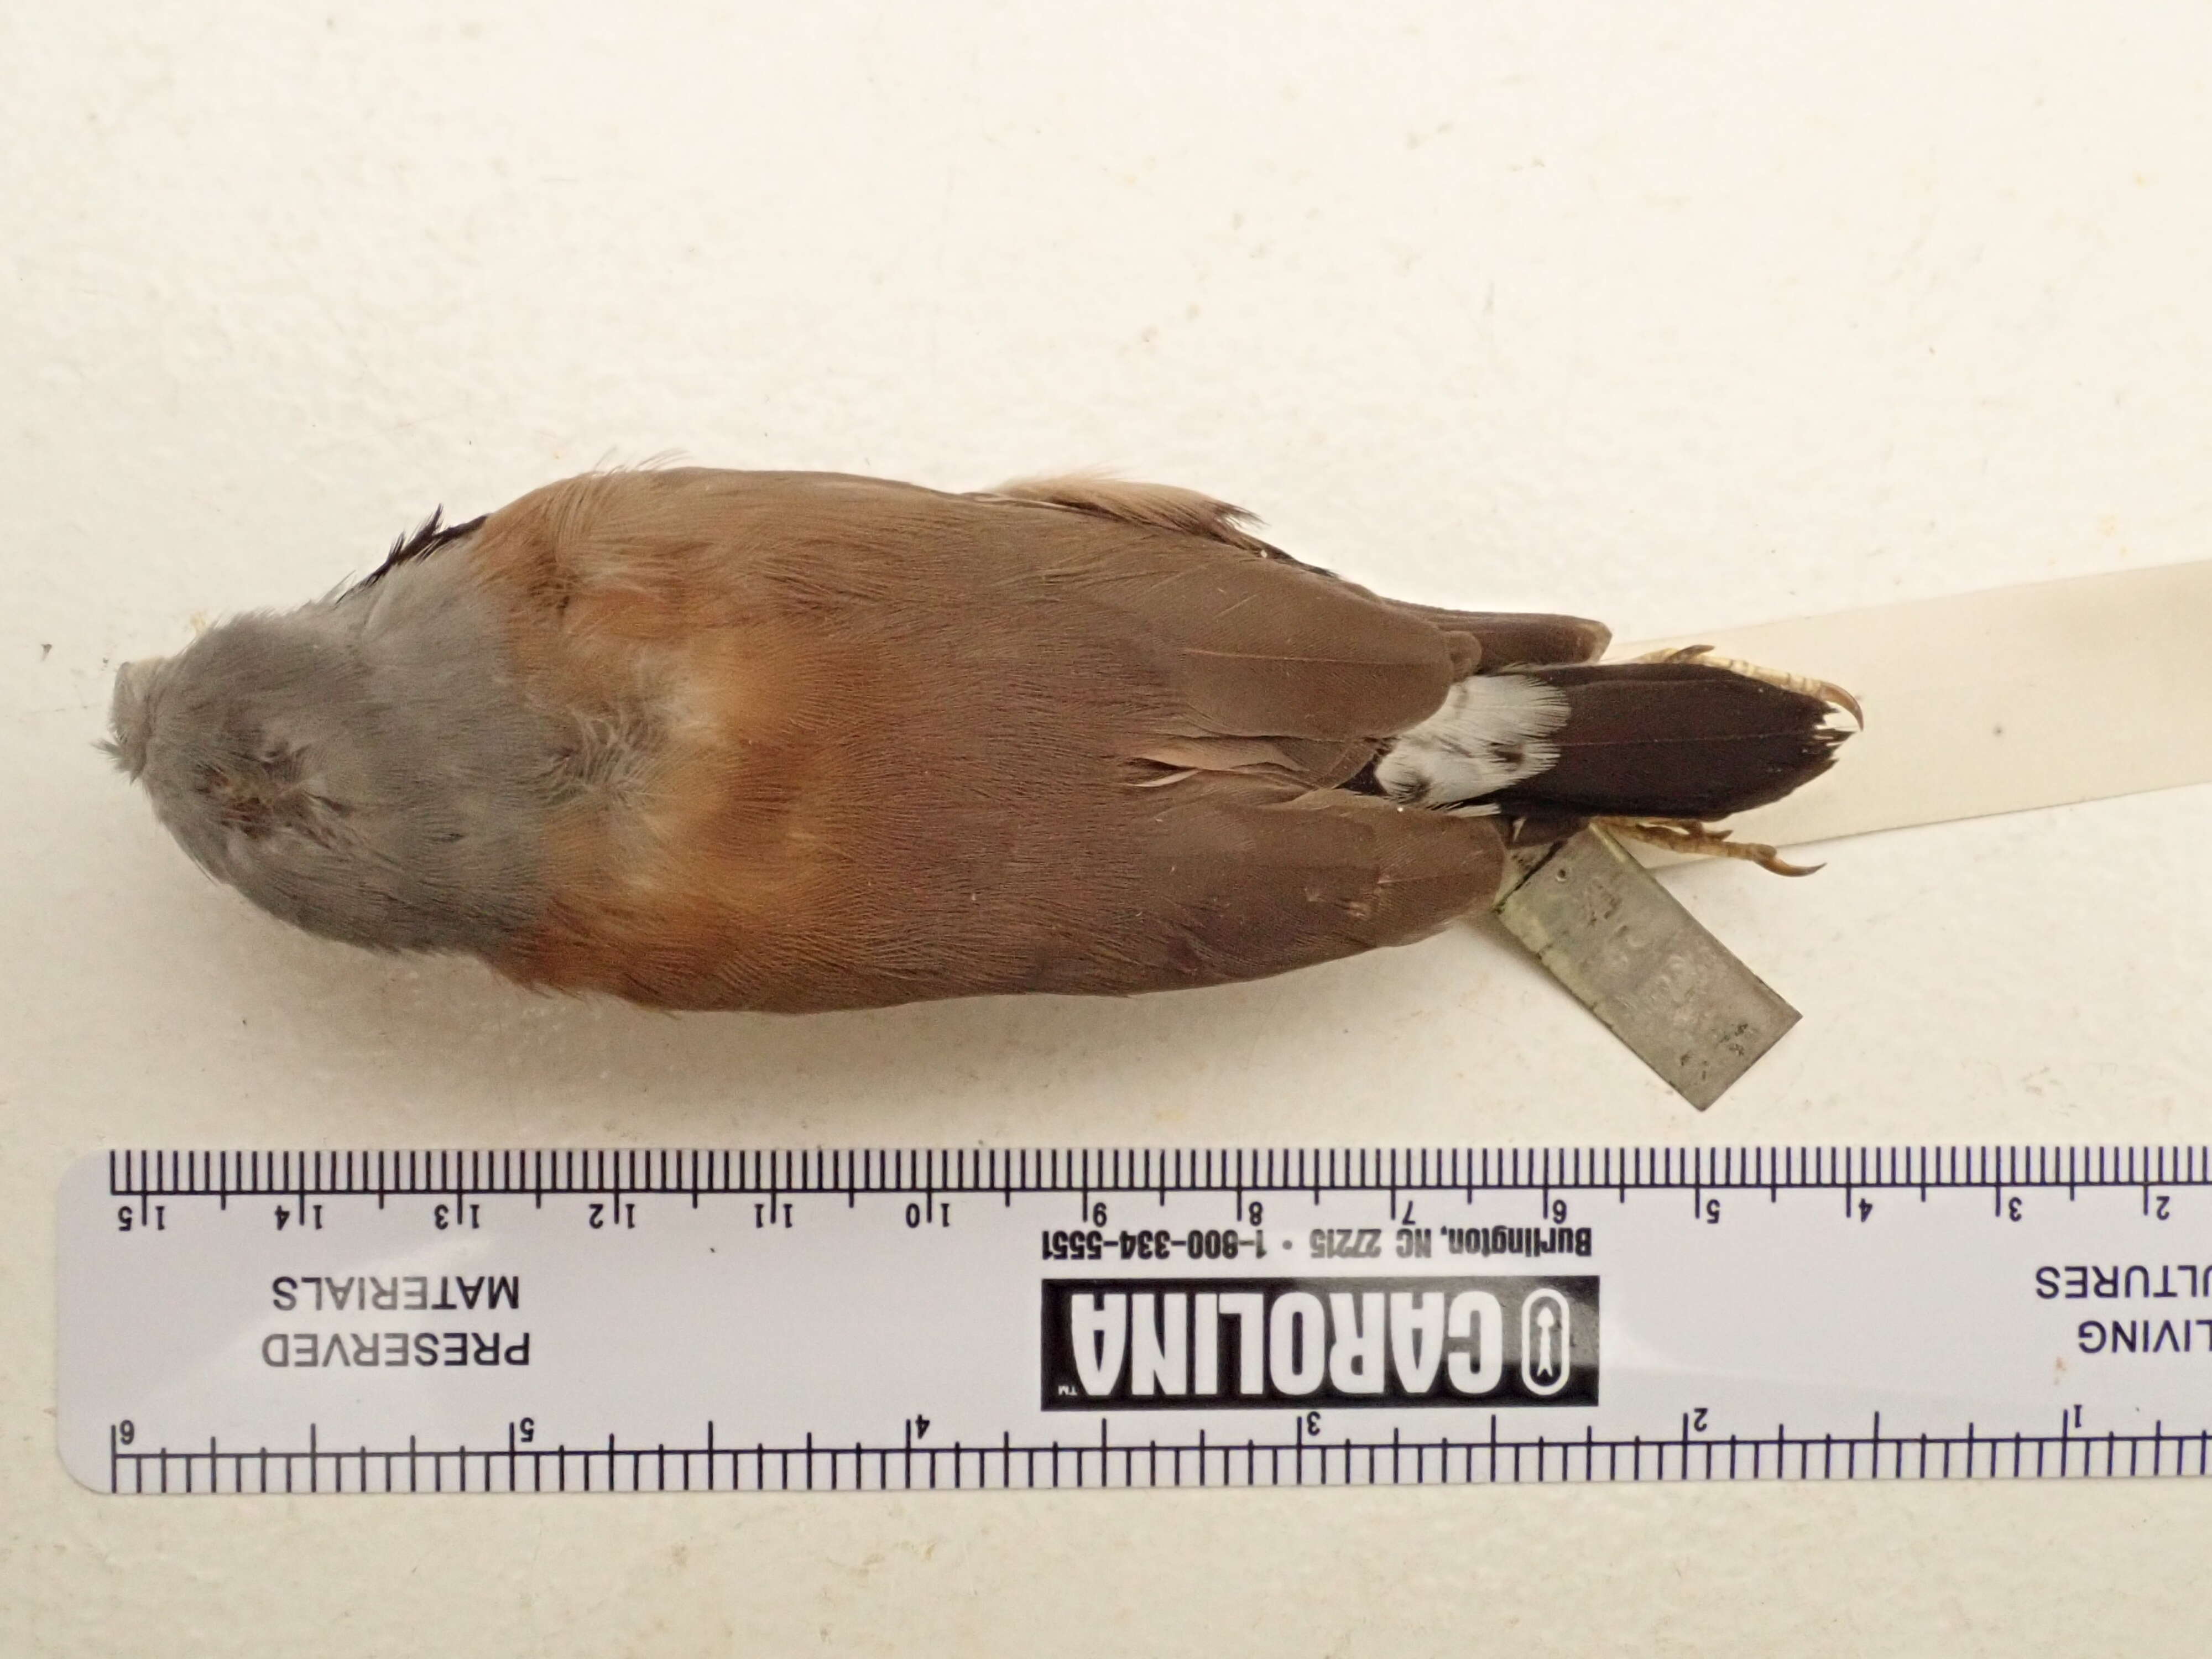 Image of Black-throated Finch